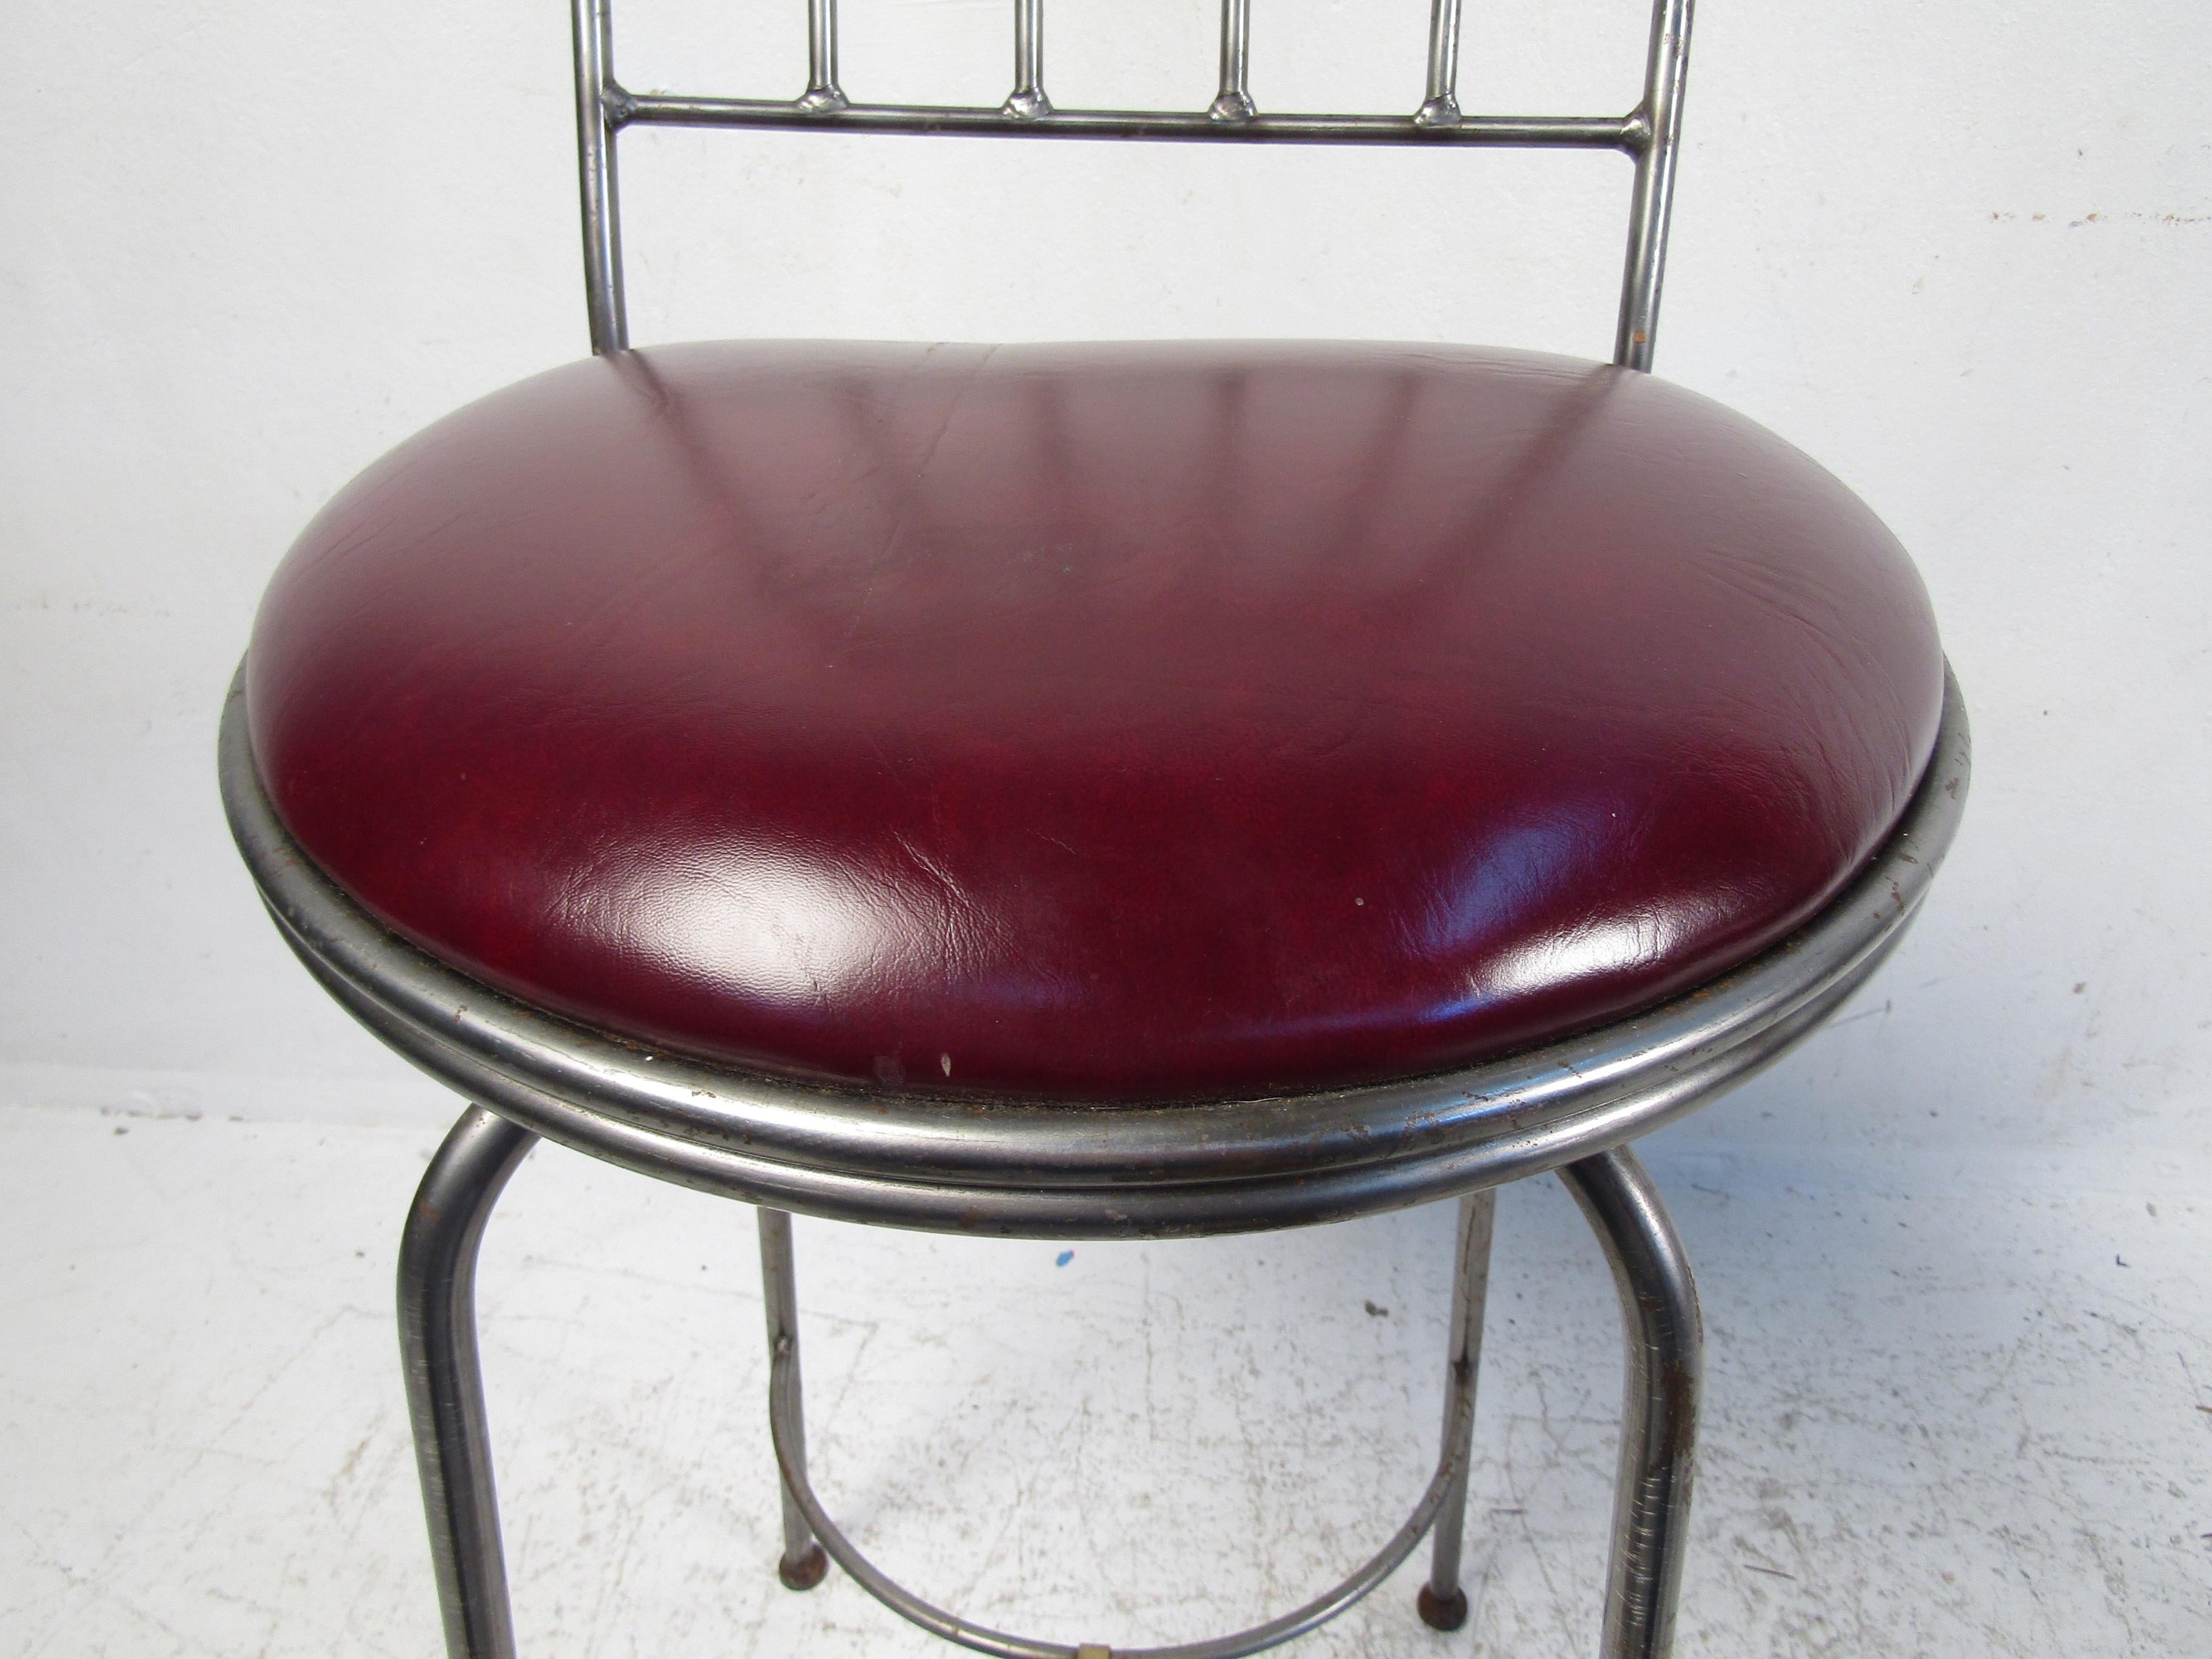 This charming bar stools features soft leather seats and a rugged iron frame. With a simplistic design, these stool will fit into almost any decor while still adding their own version of flare to your space. made to last this stool will be providing